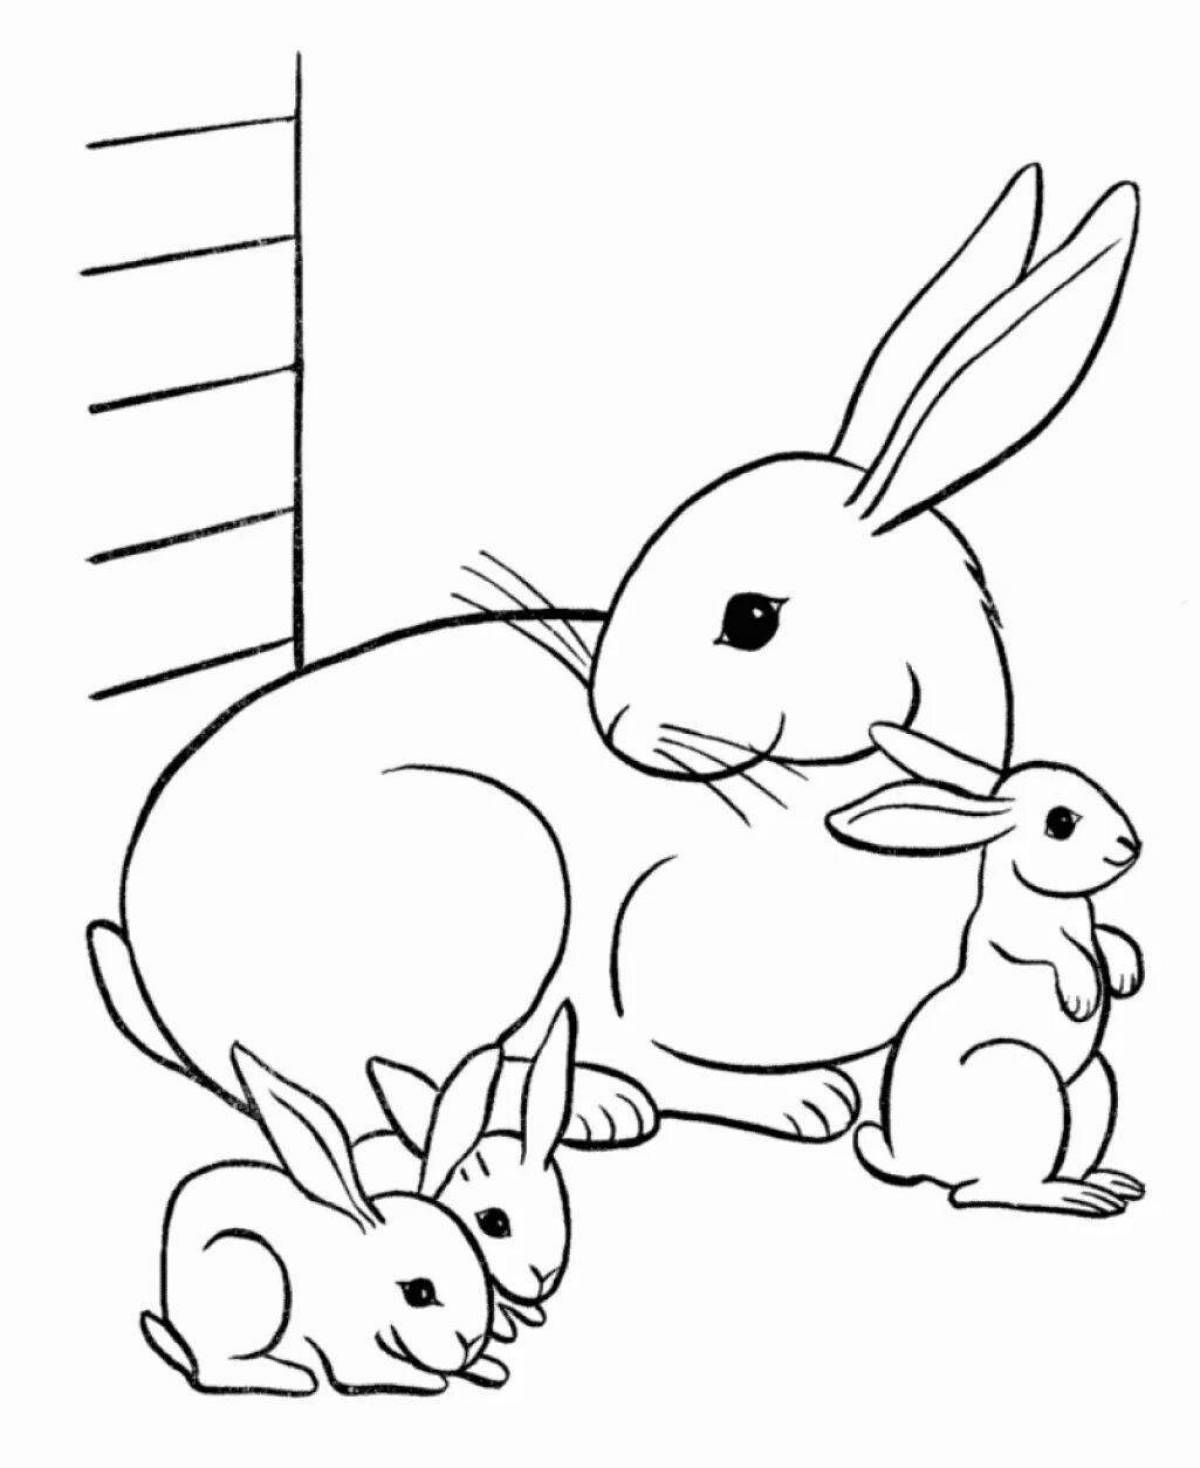 Glamorous Bunny Coloring Page for 6-7 year olds